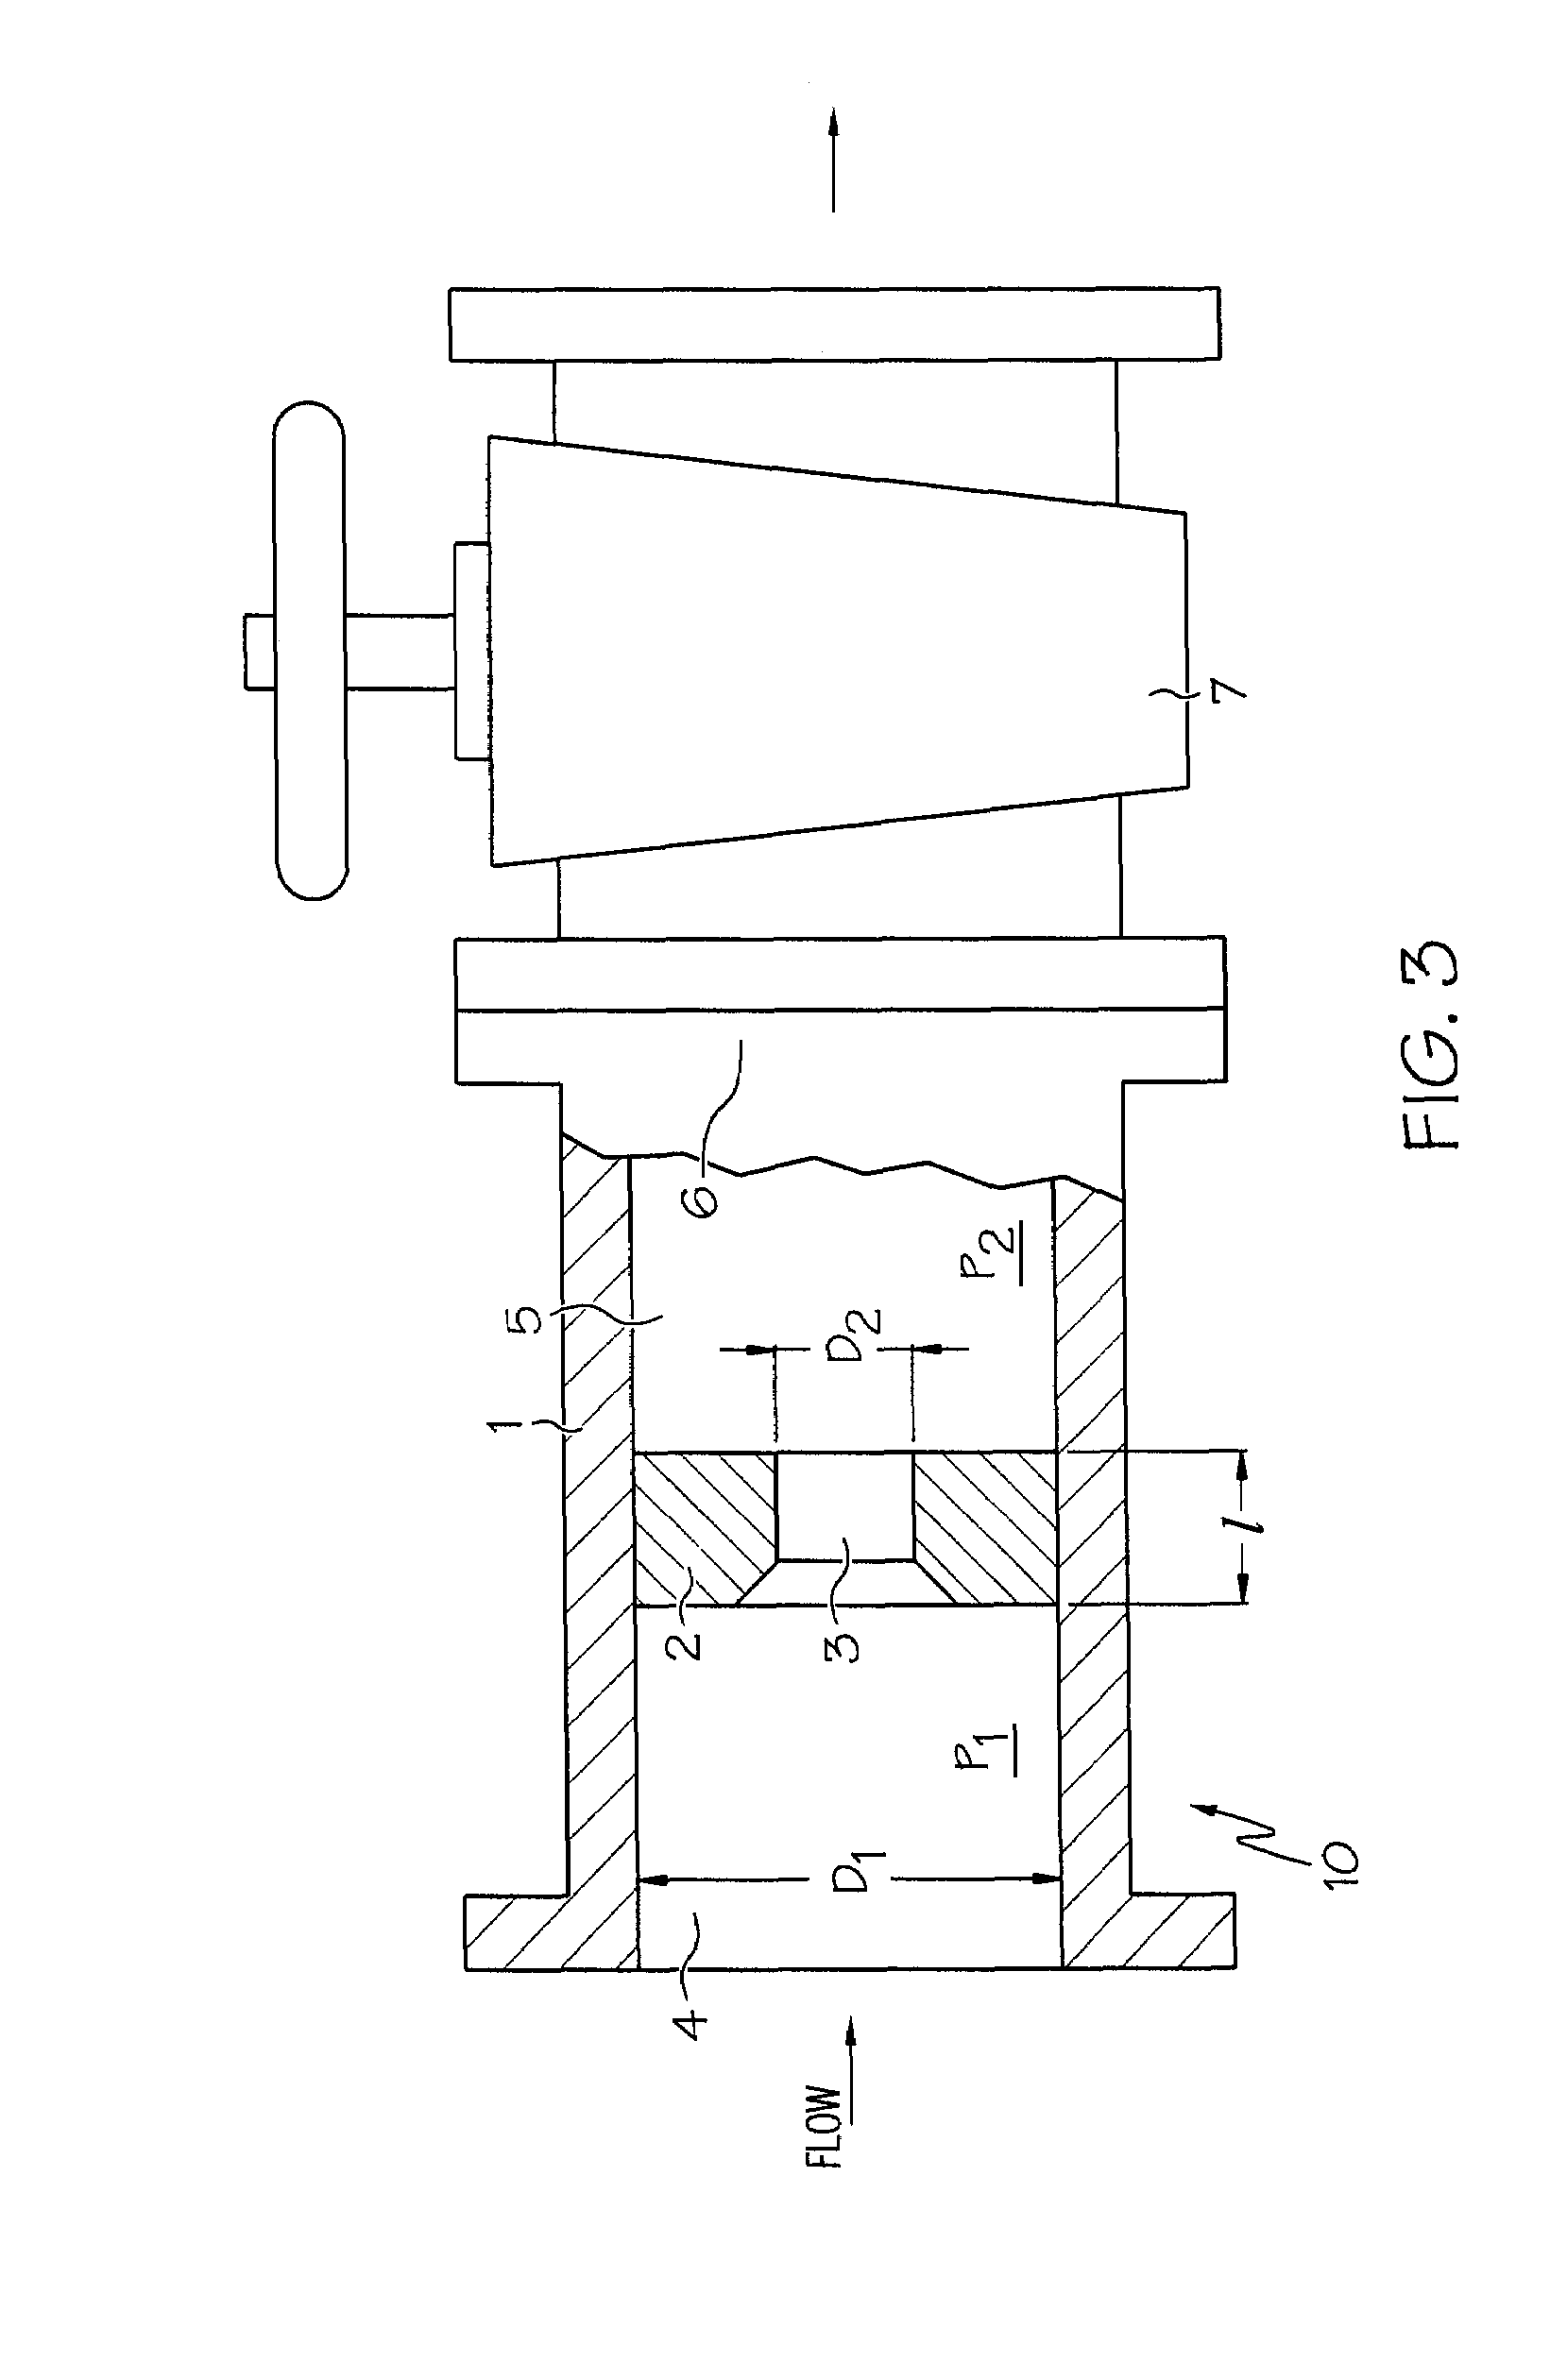 Apparatus and method for increasing alcohol yield from grain